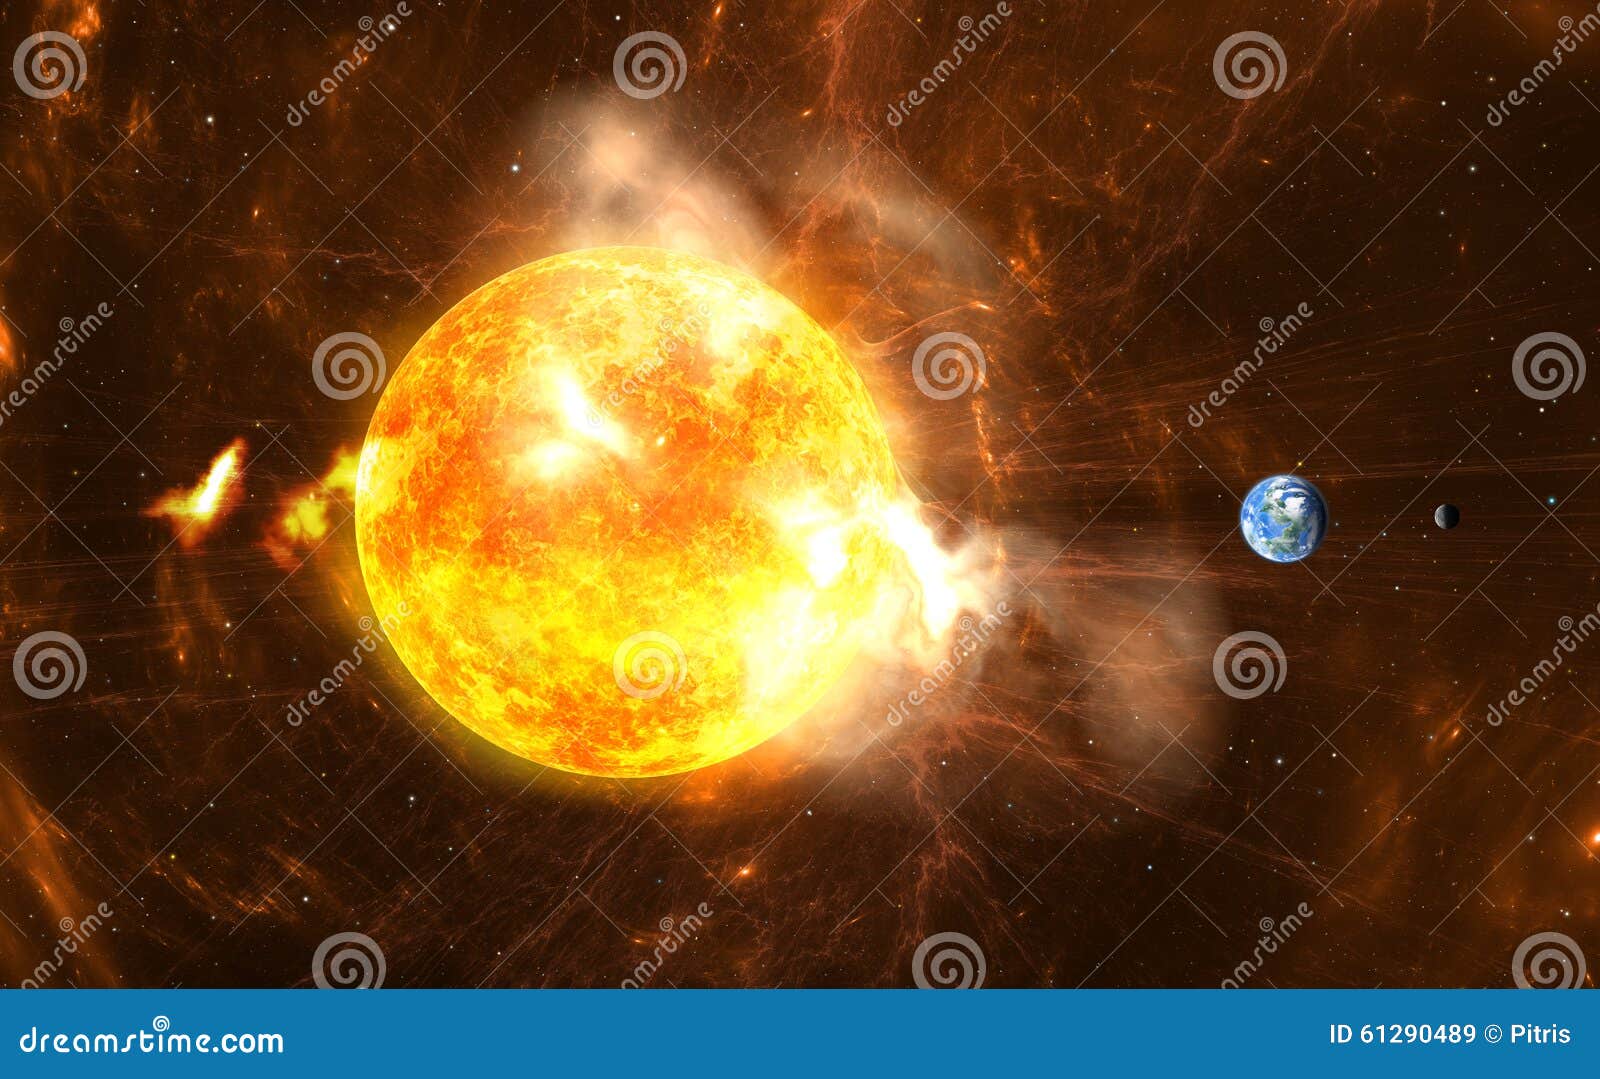 giant solar flares. sun producing super-storms and massive radiation bursts